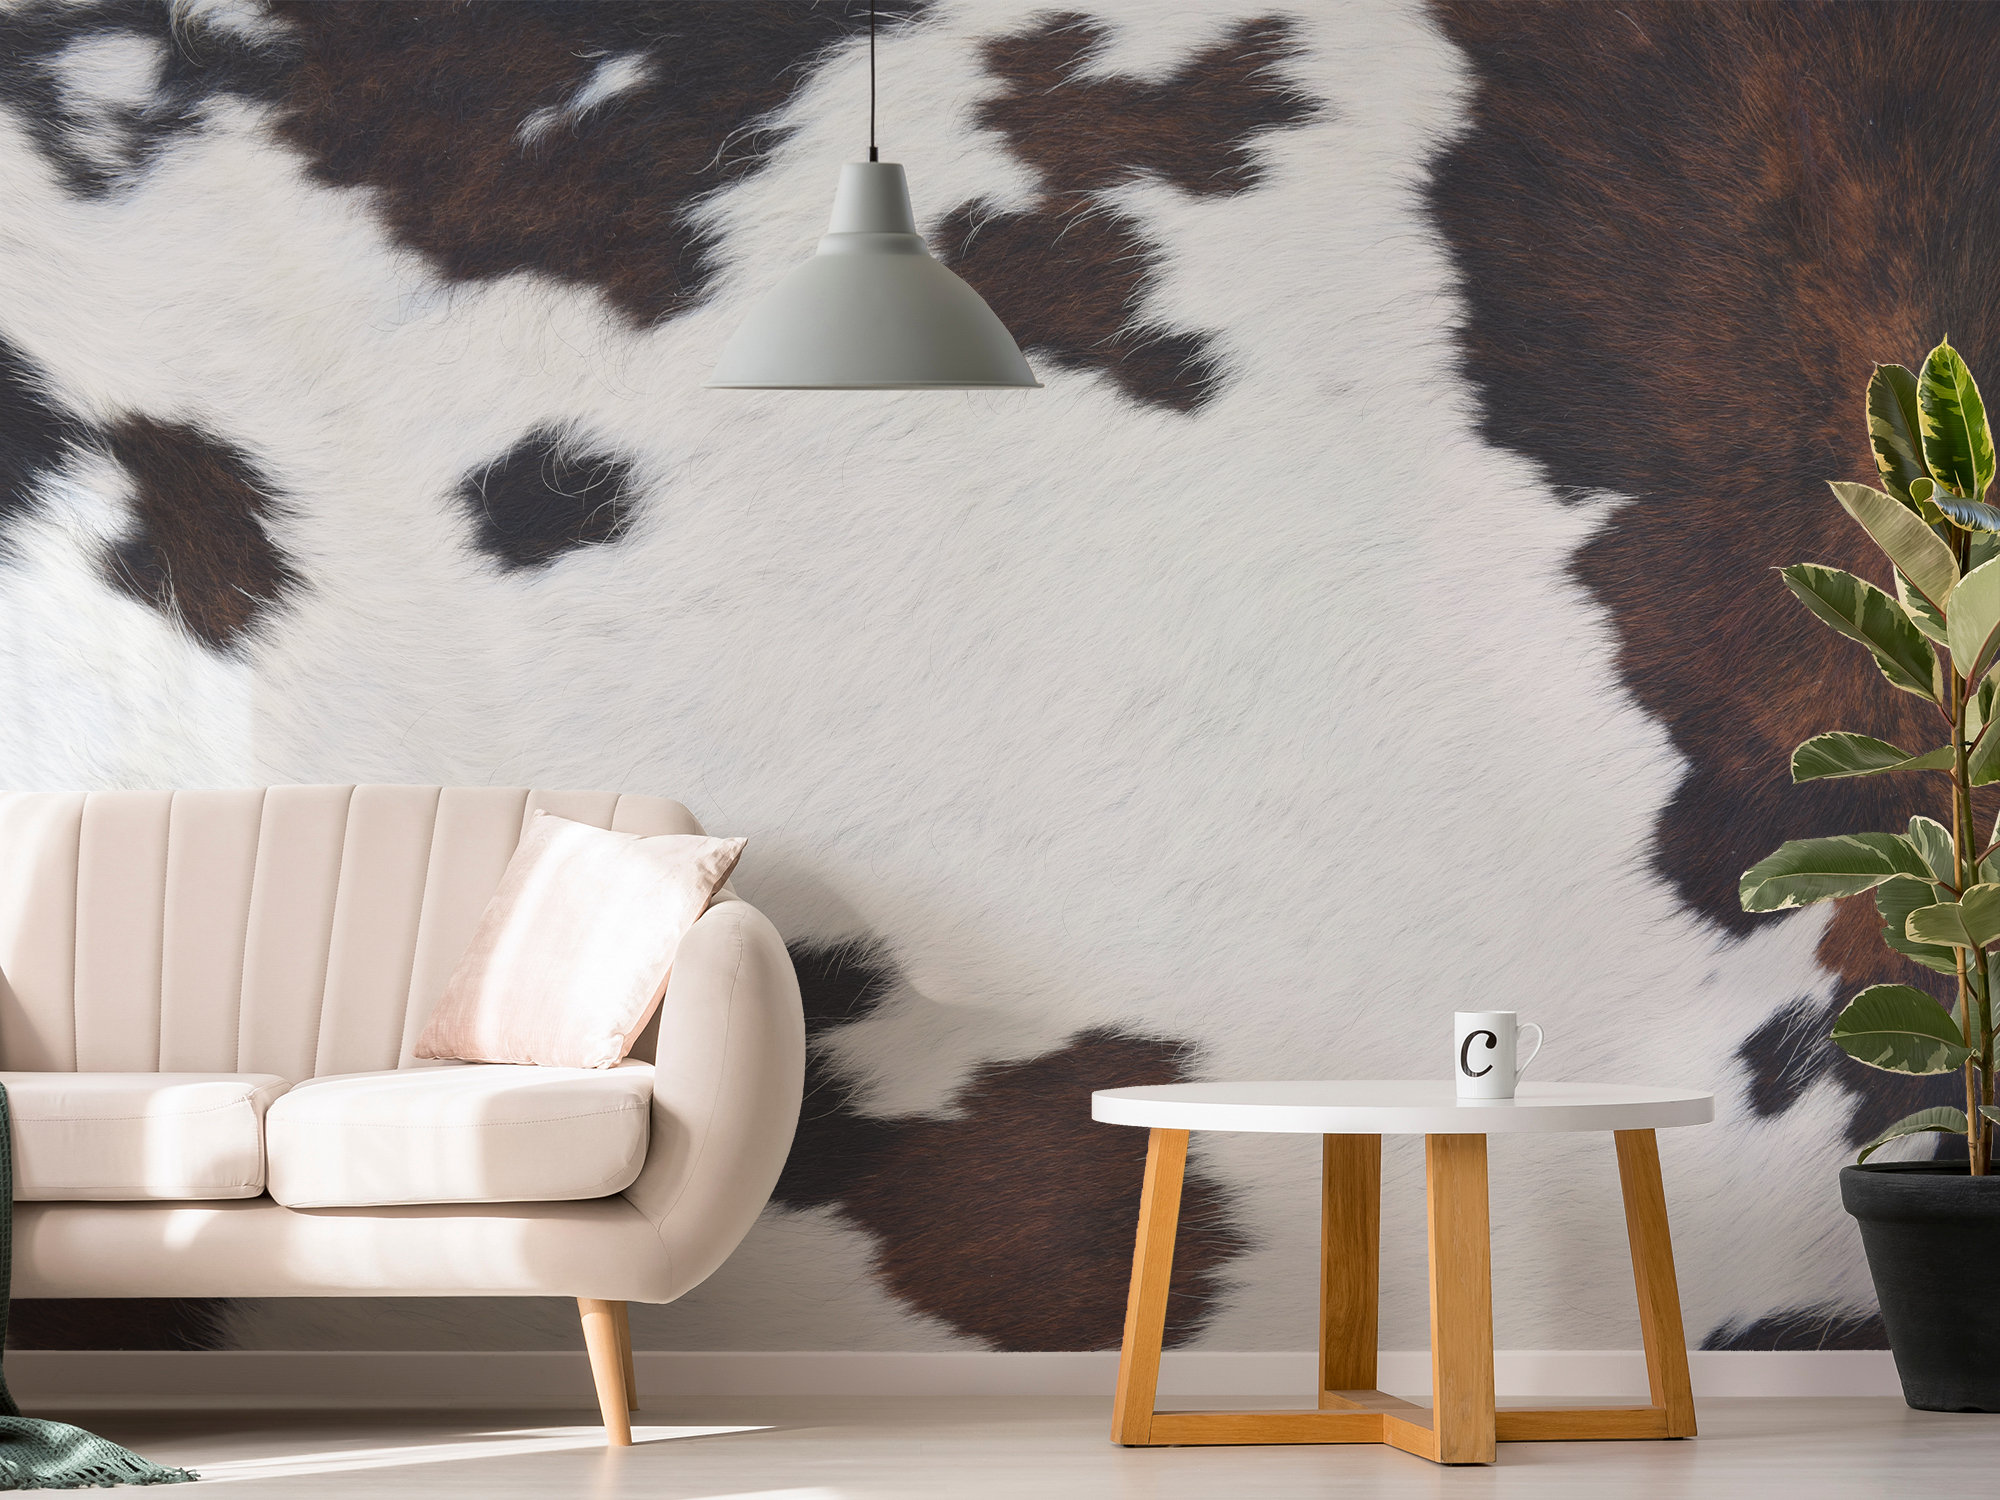 Cow Print Fabric, Wallpaper and Home Decor